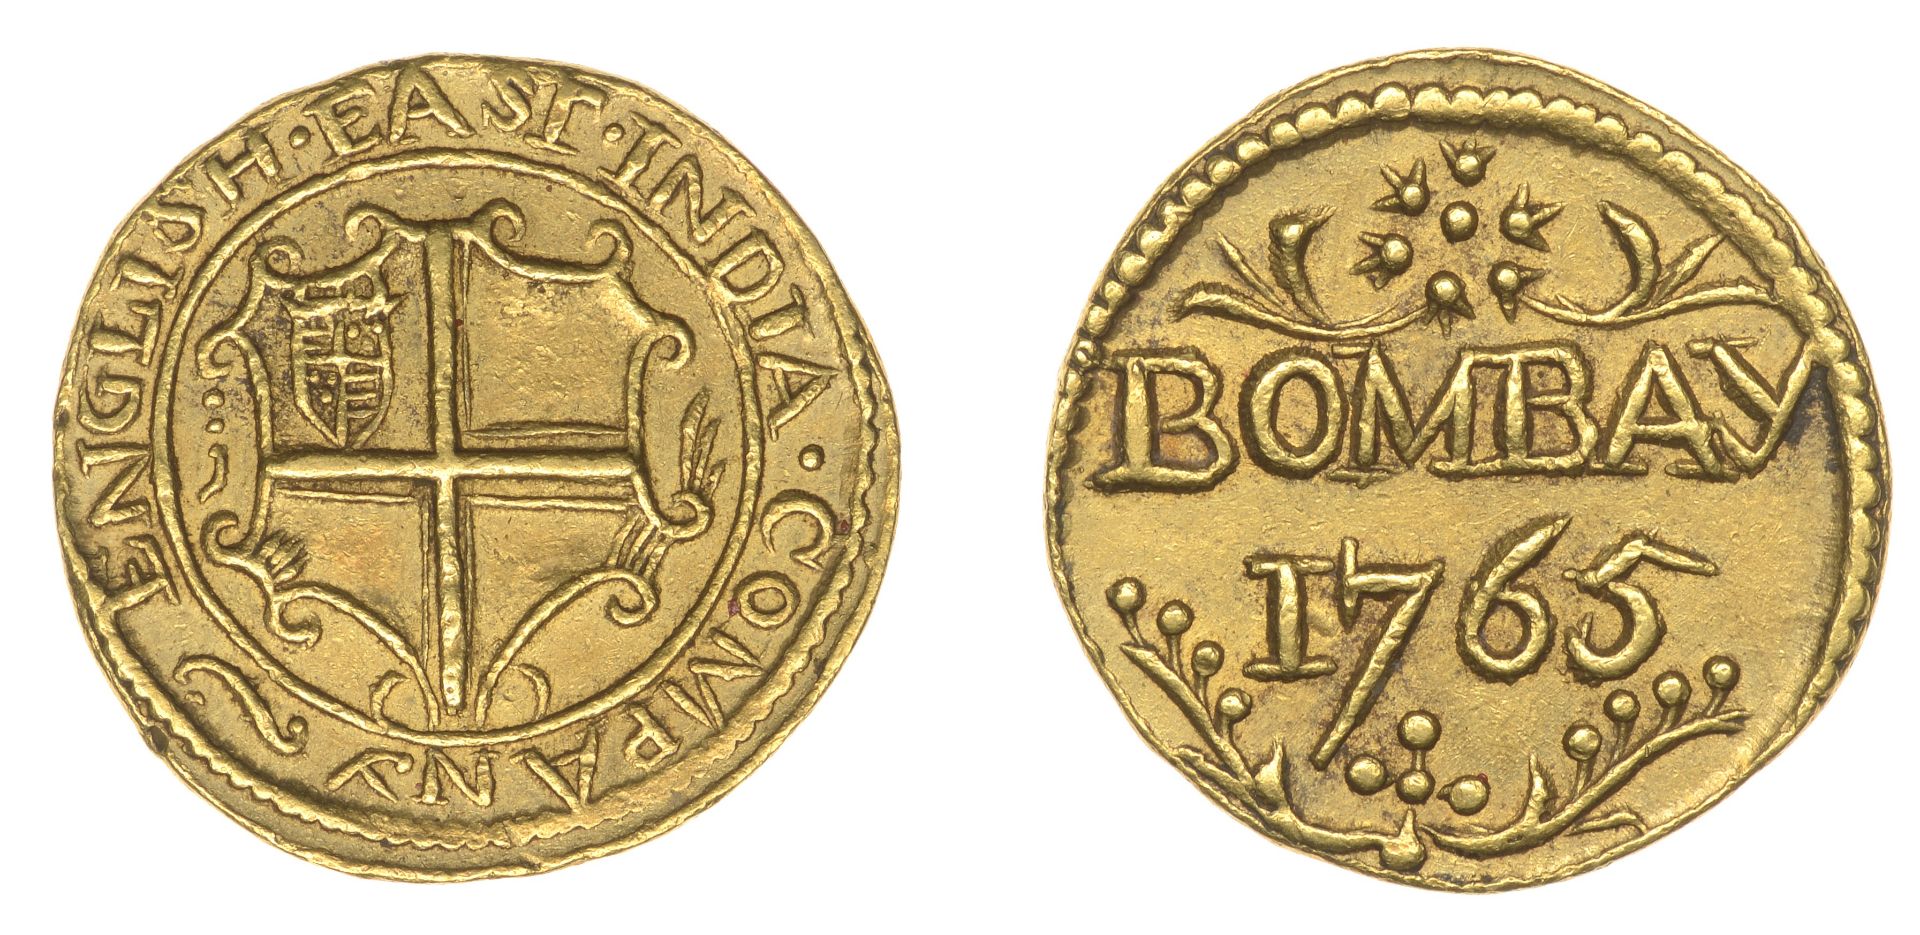 East India Company, Bombay Presidency, Early coinages: English design, gold Half-Mohur, 1765...